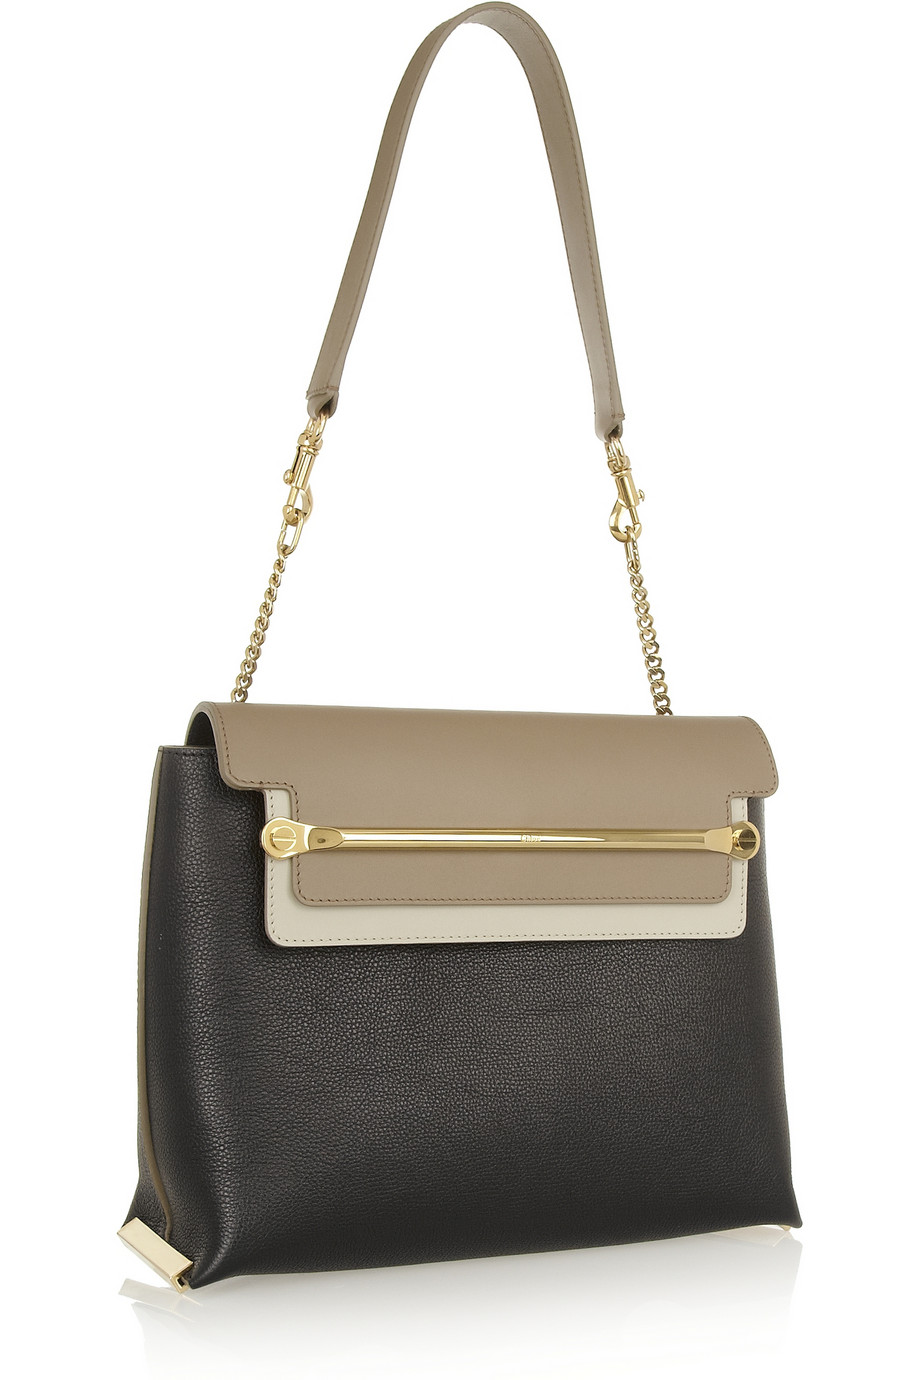 Chloé Clare Small Leather Shoulder Bag in Black | Lyst